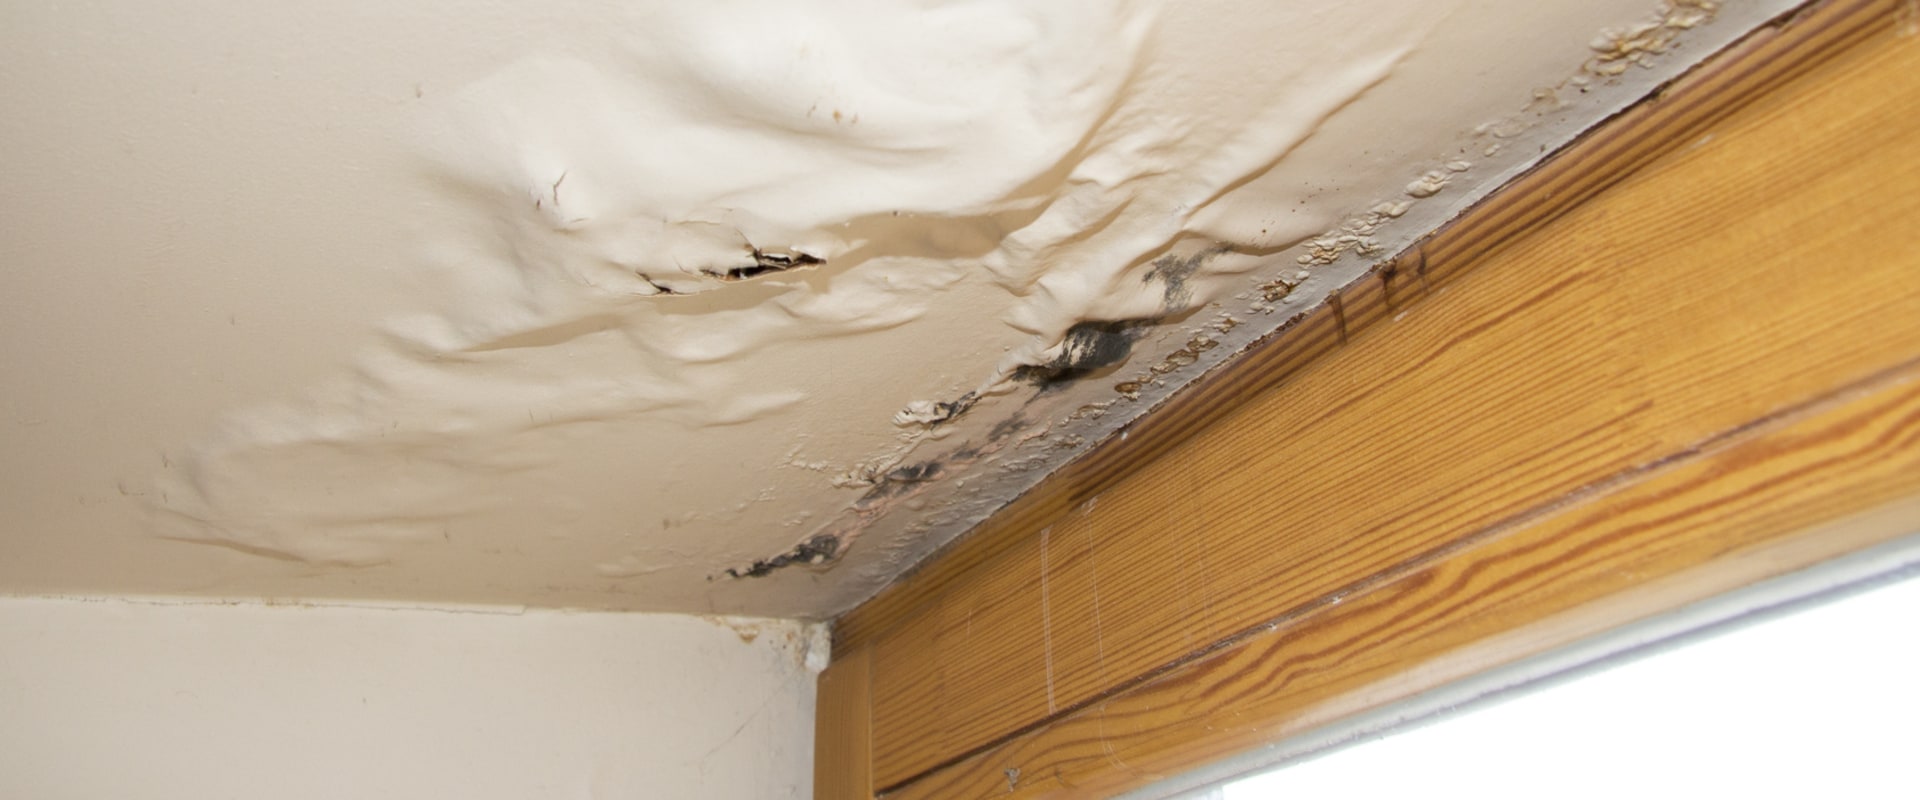 When Should I Worry About a Water-Damaged Ceiling?